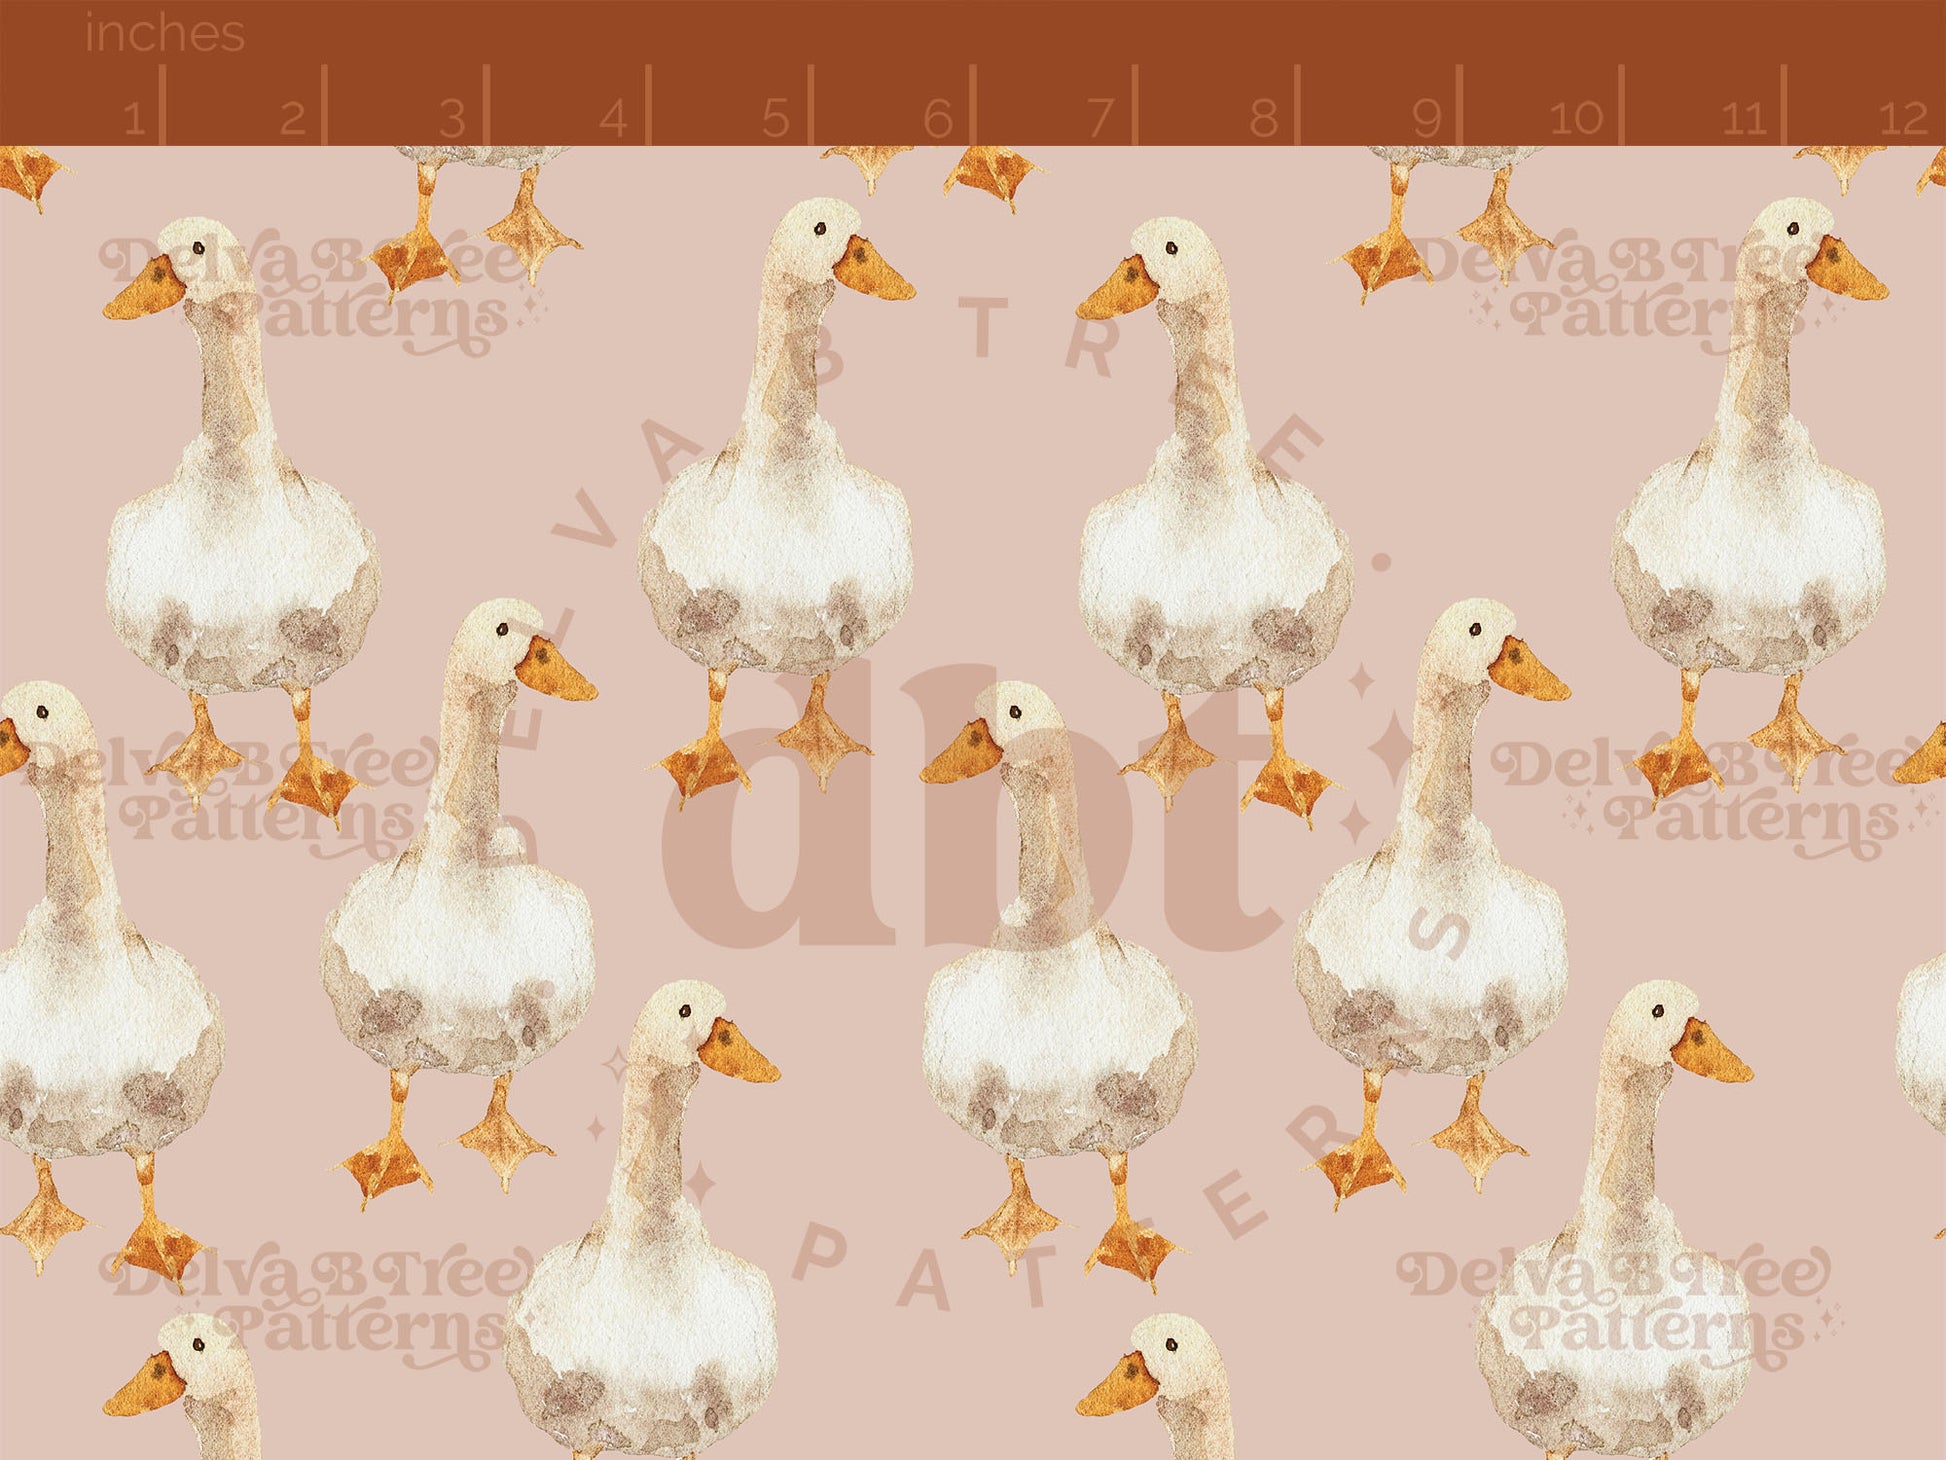 Watercolor goose on a blush pink pattern scale for small shops that make handmade products in small batches with spring farm animal digital files.